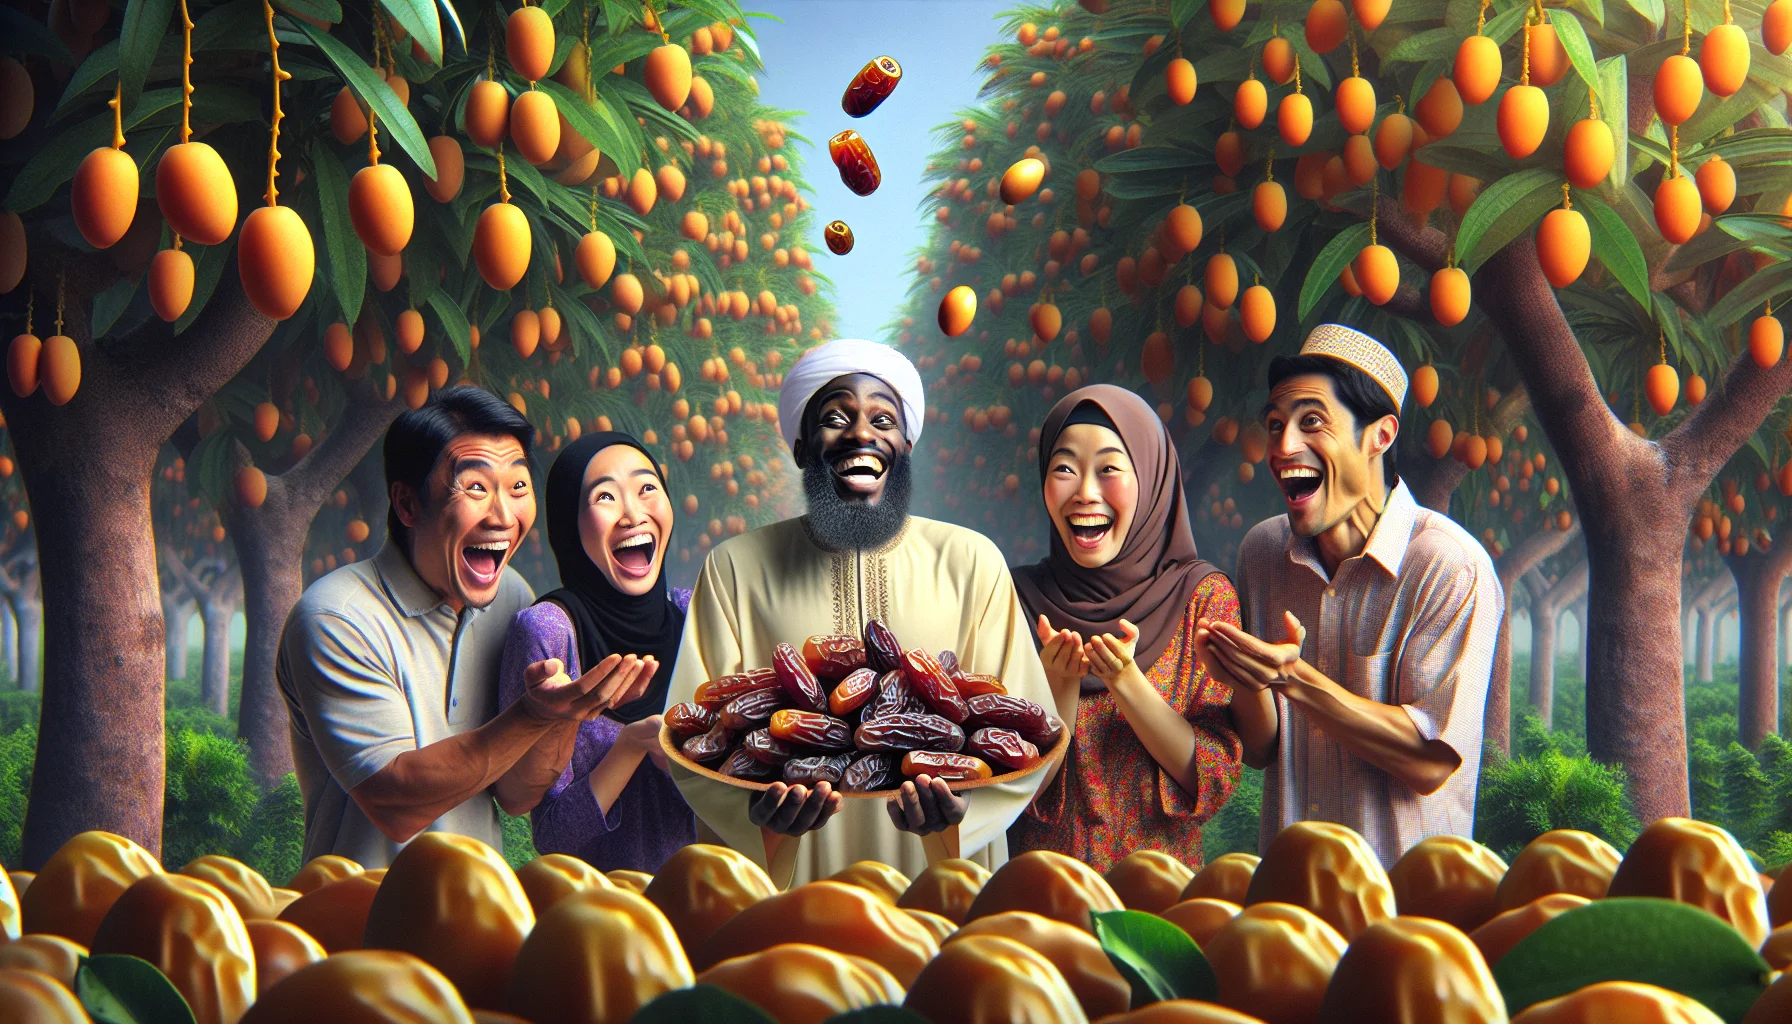 Create a realistic image representing a humorous gardening scenario. Picture an array of fruit trees laden with juicy fruits. In the heart of the garden, exist trees that are loaded with pitted dates. These dates are falling into the waiting hands of a group of joyful garden workers - a South Asian man, a Middle-Eastern woman, a Caucasian female, and a Hispanic male. Their faces are lit with excitement and laughter as they are hilariously surprised by the amount of pitted dates they are receiving, encouraging viewers to take part in the joy of gardening.